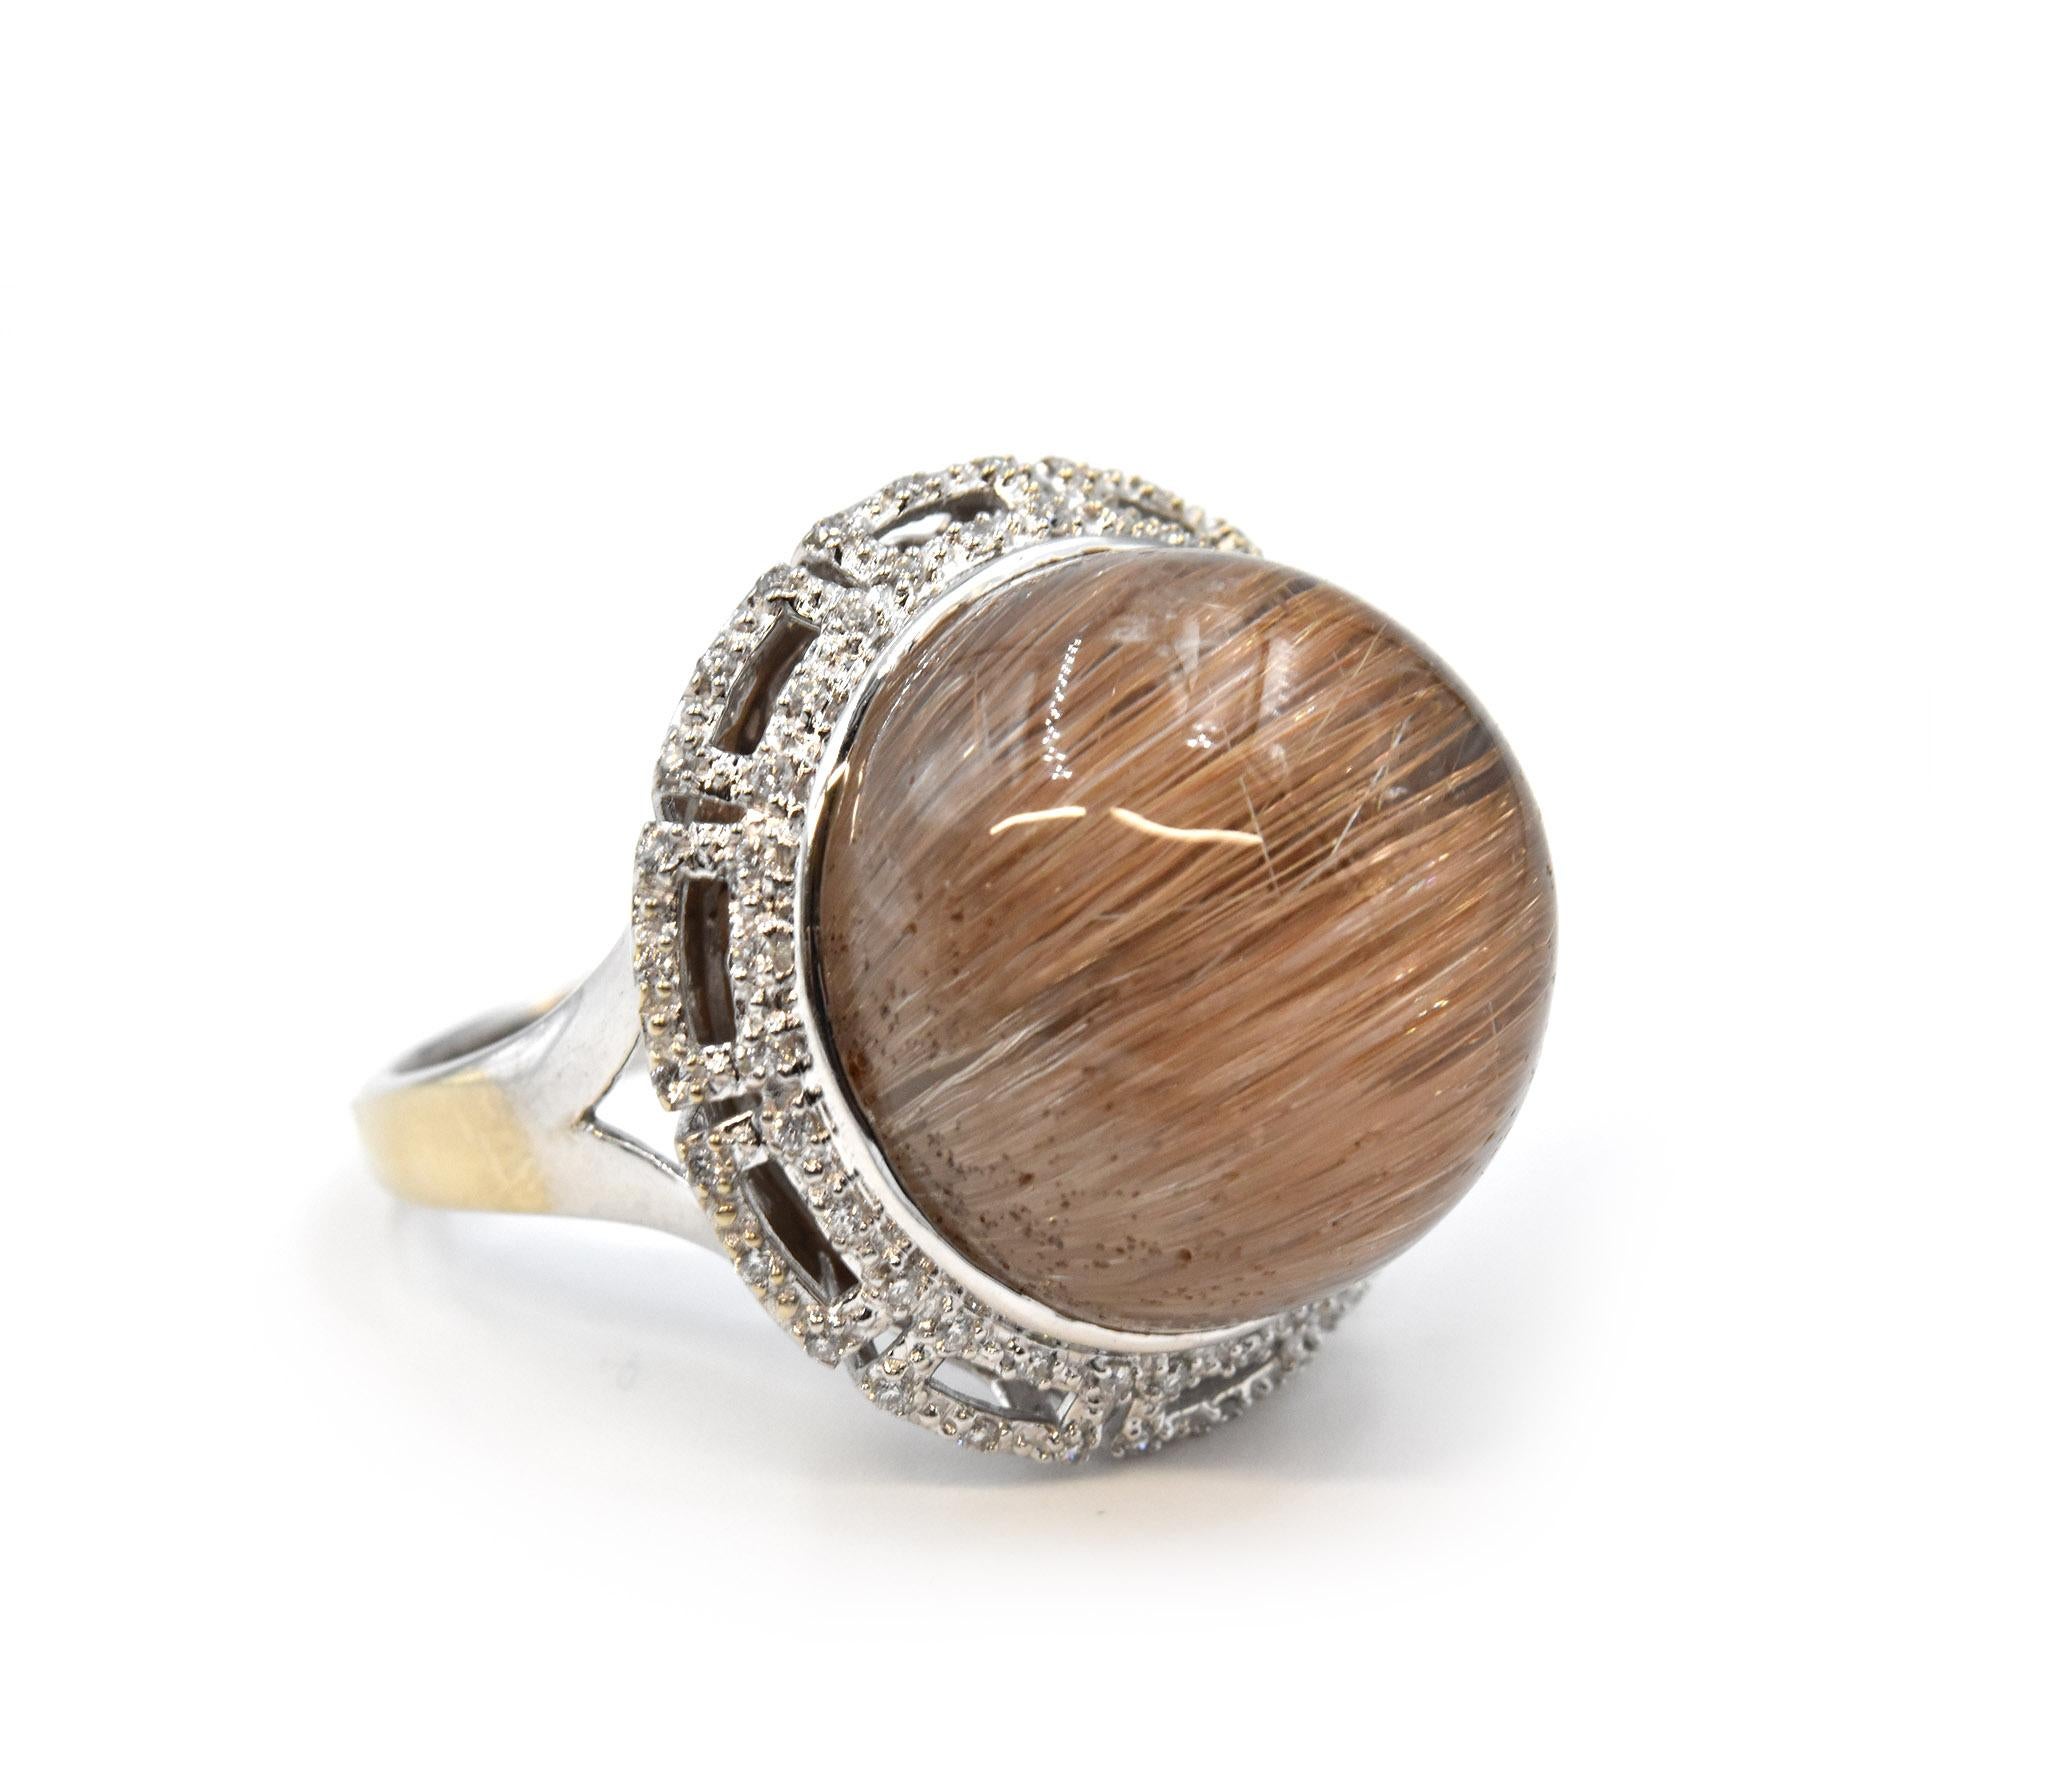 Designer: custom design
Material: 18k White Gold
Rutilated Quartz: 30.15ct
Diamonds: 120 Round Diamonds = .60cttw
Color: H
Clarity: SI1
Ring Size: 9.25 (please allow two additional shipping days for sizing requests)
Weight: 12 grams
Dimensions: 24mm